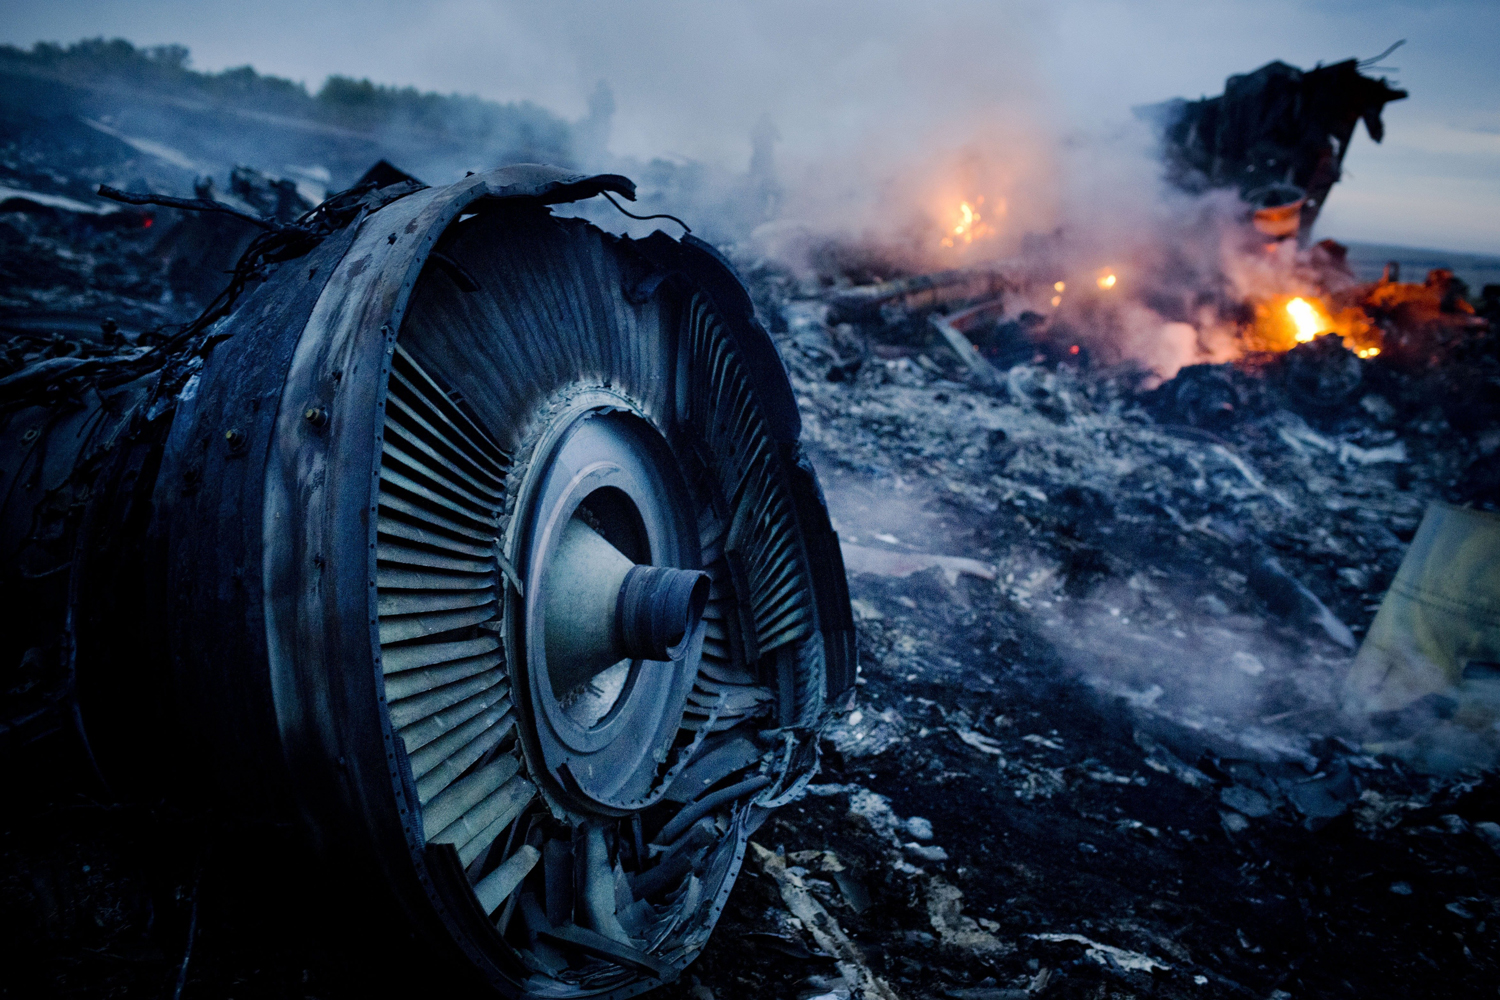 Debris from Malaysia Airlines Flight 17 is shown smouldering in a field July 17, 2014 in Grabovo, Ukraine.